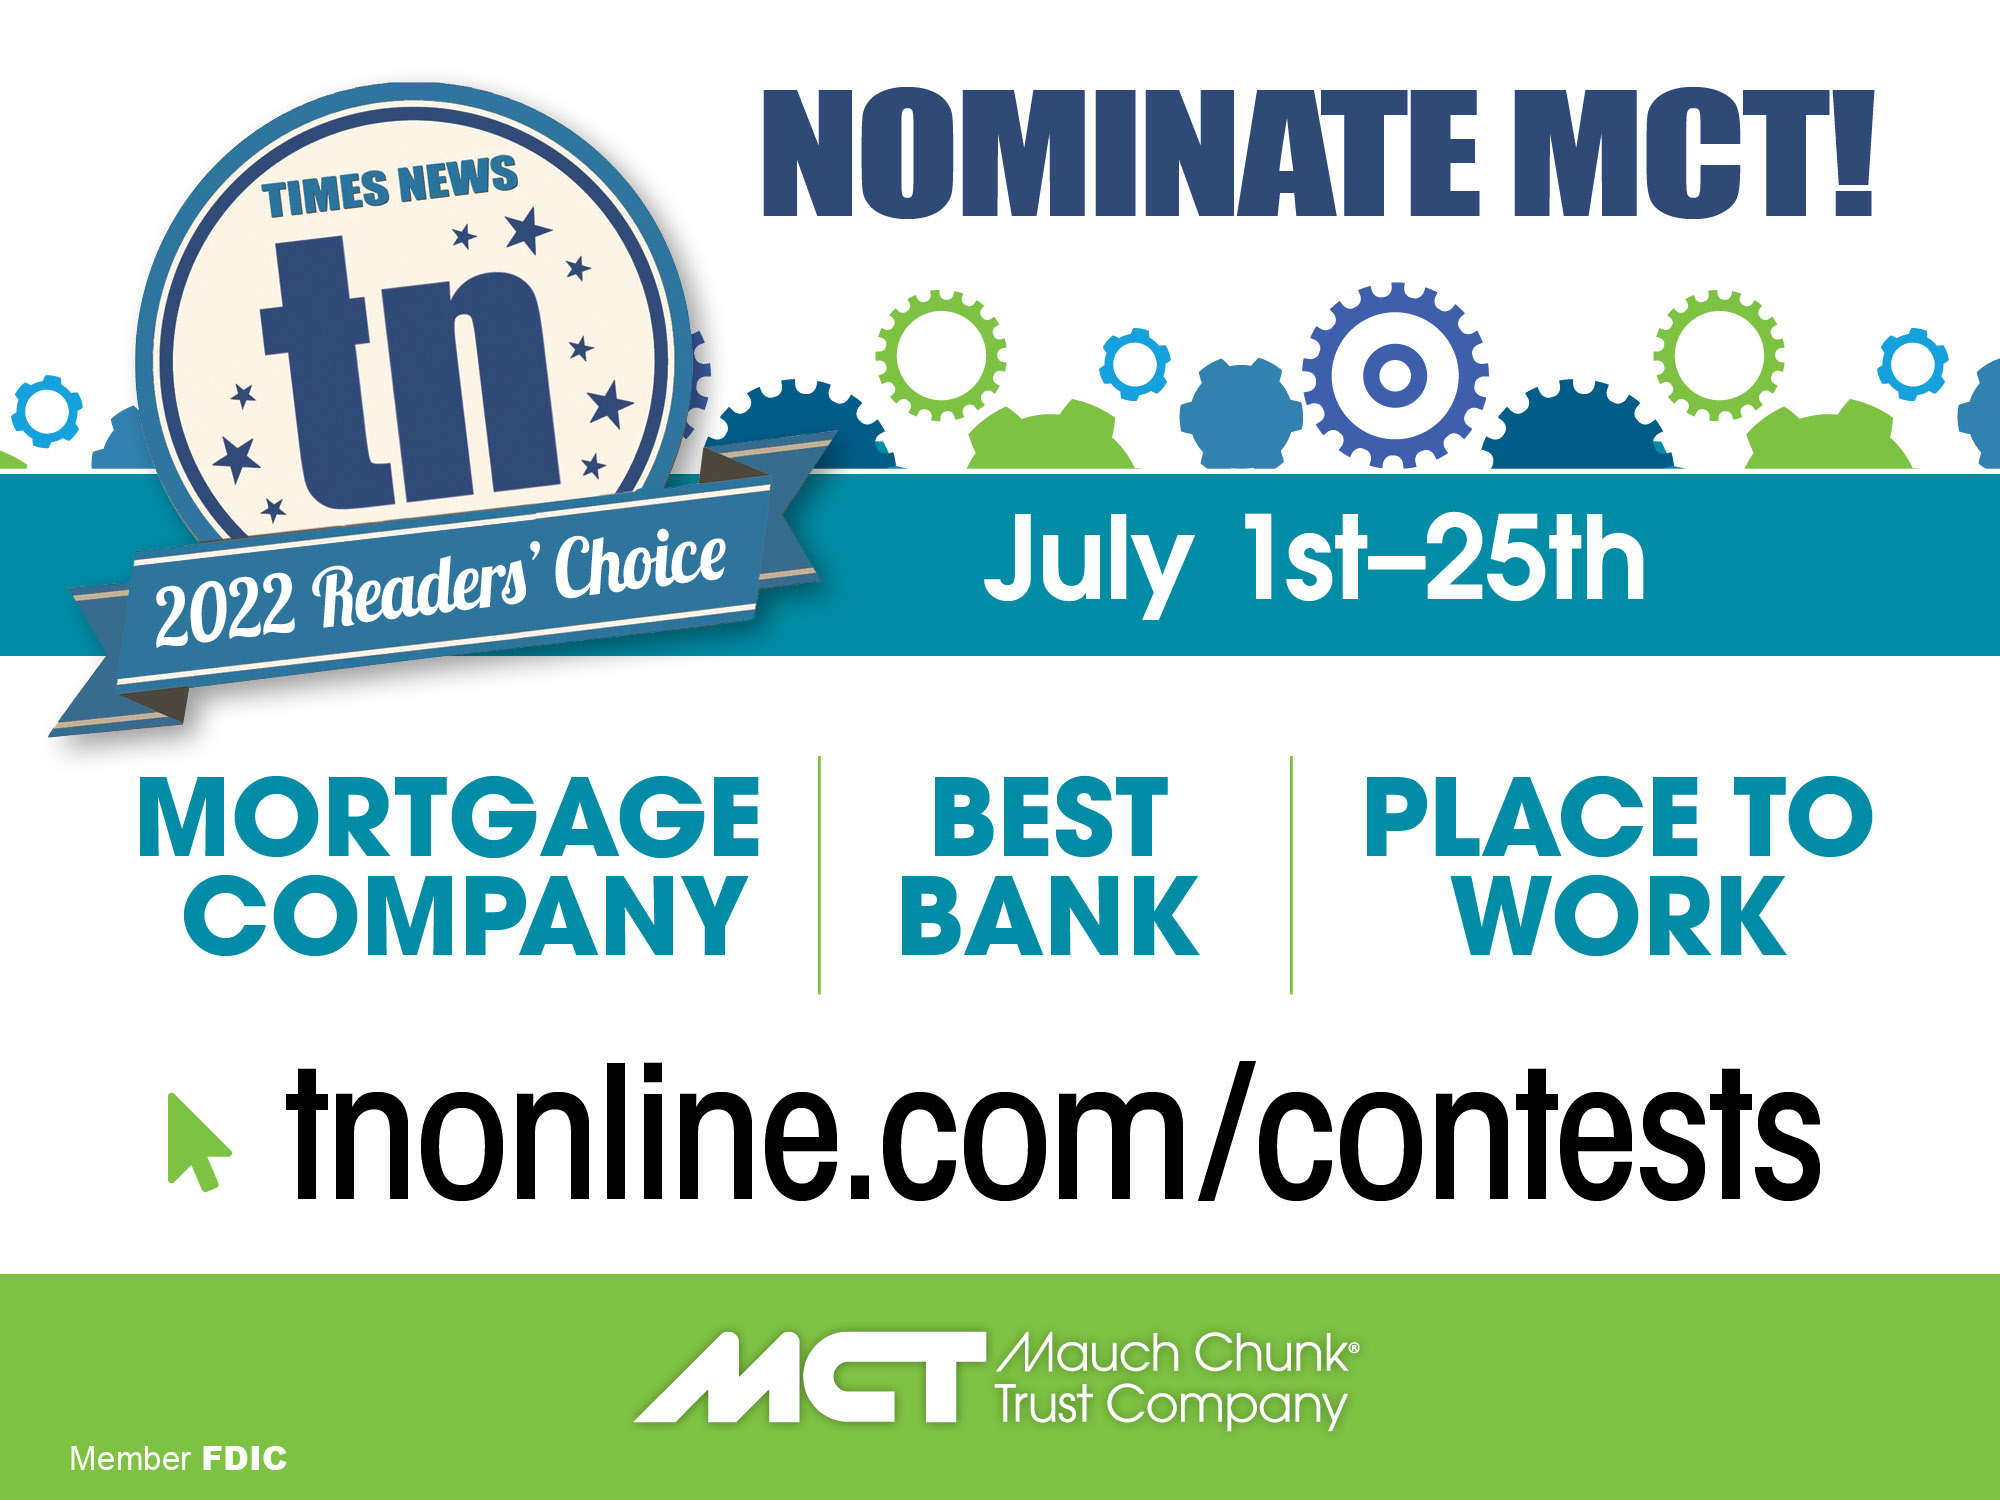 Readers Choice 2022 Nominate MCT